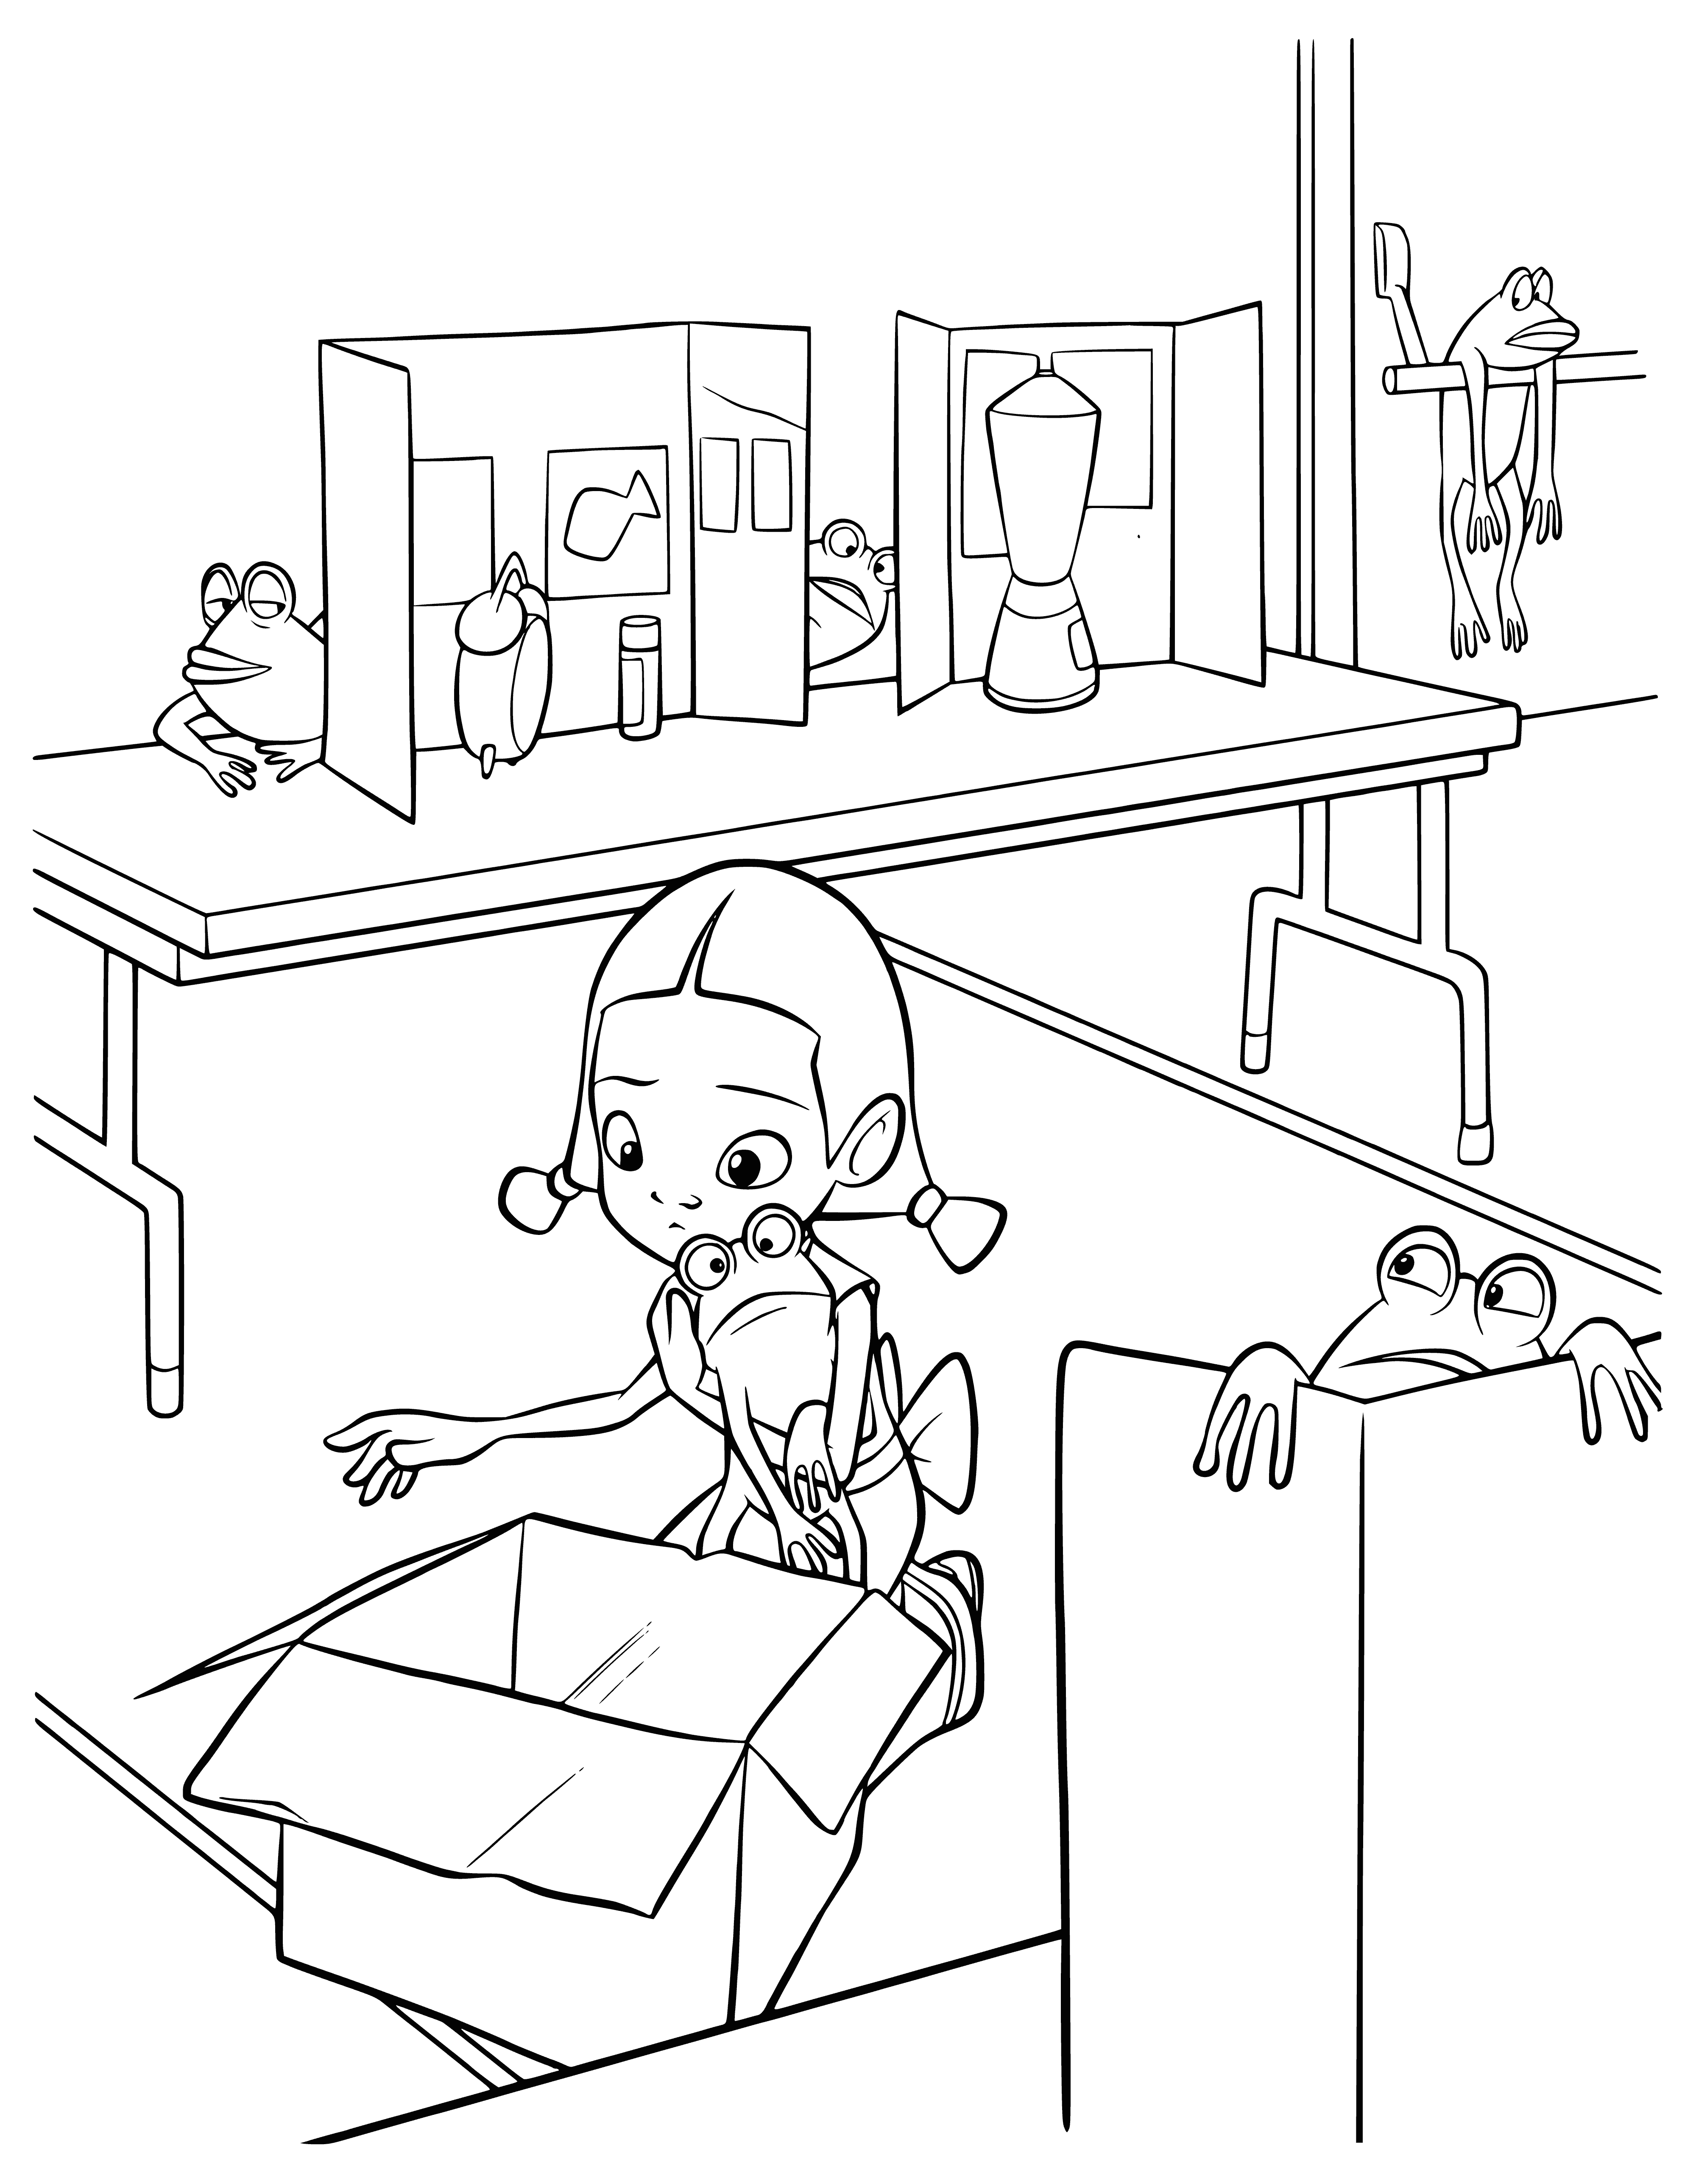 Trained frogs coloring page